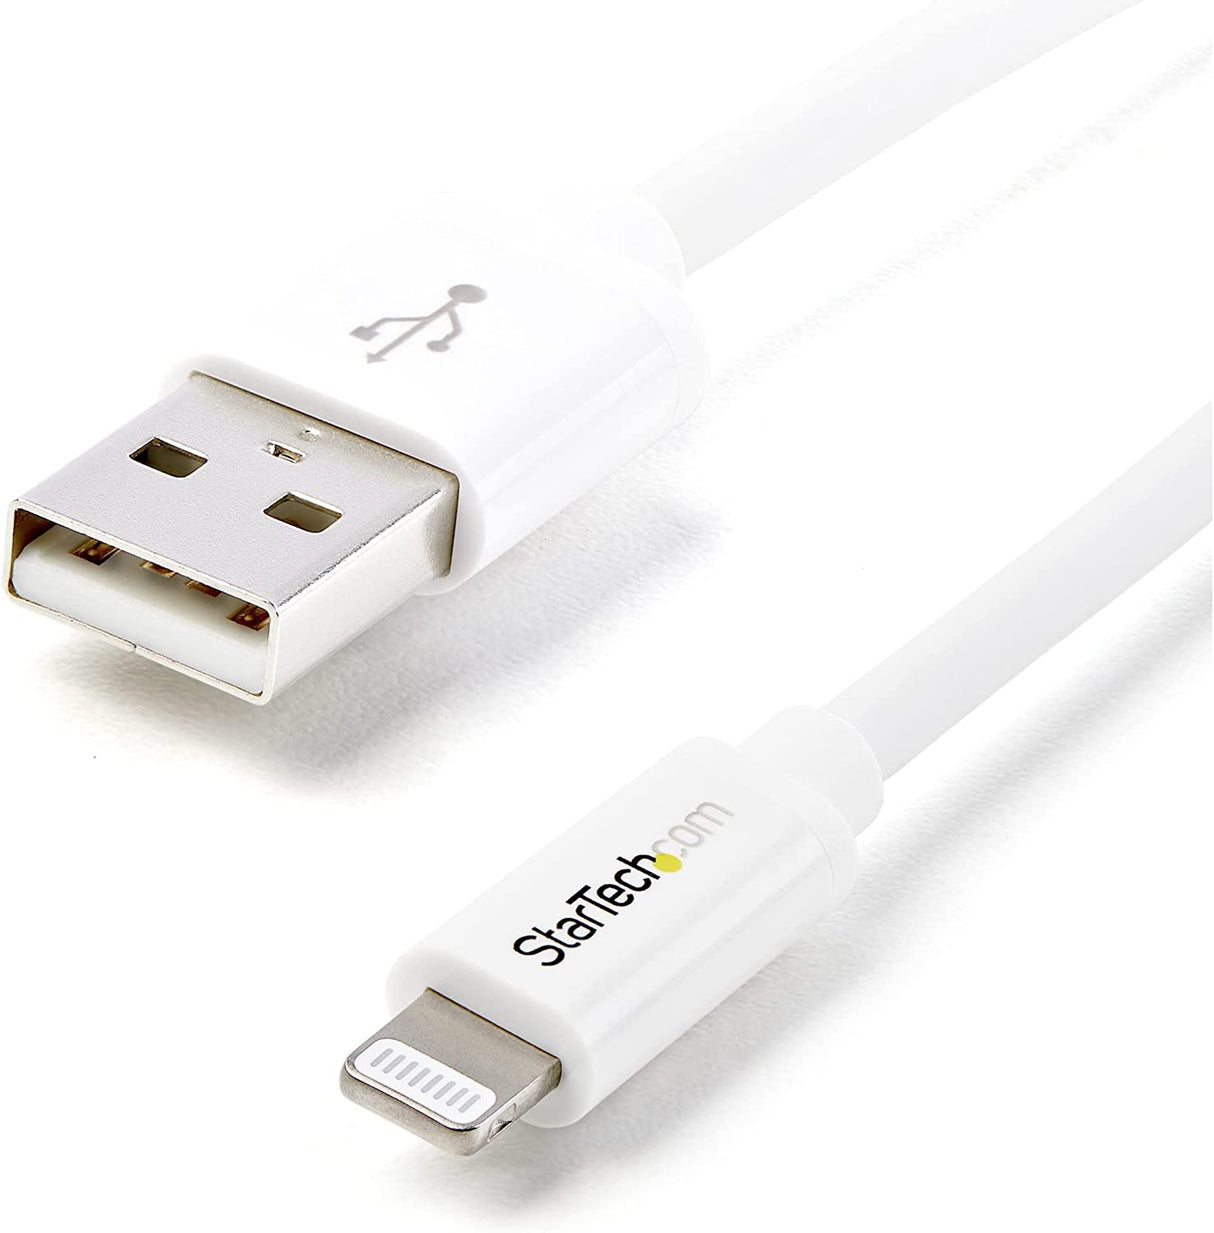 StarTech.com 1m (3ft) White Apple 8-pin Lightning Connector to USB Cable for iPhone / iPod / iPad - Charge and Sync Cable - 1 meter (USBLT1MW) 3ft White